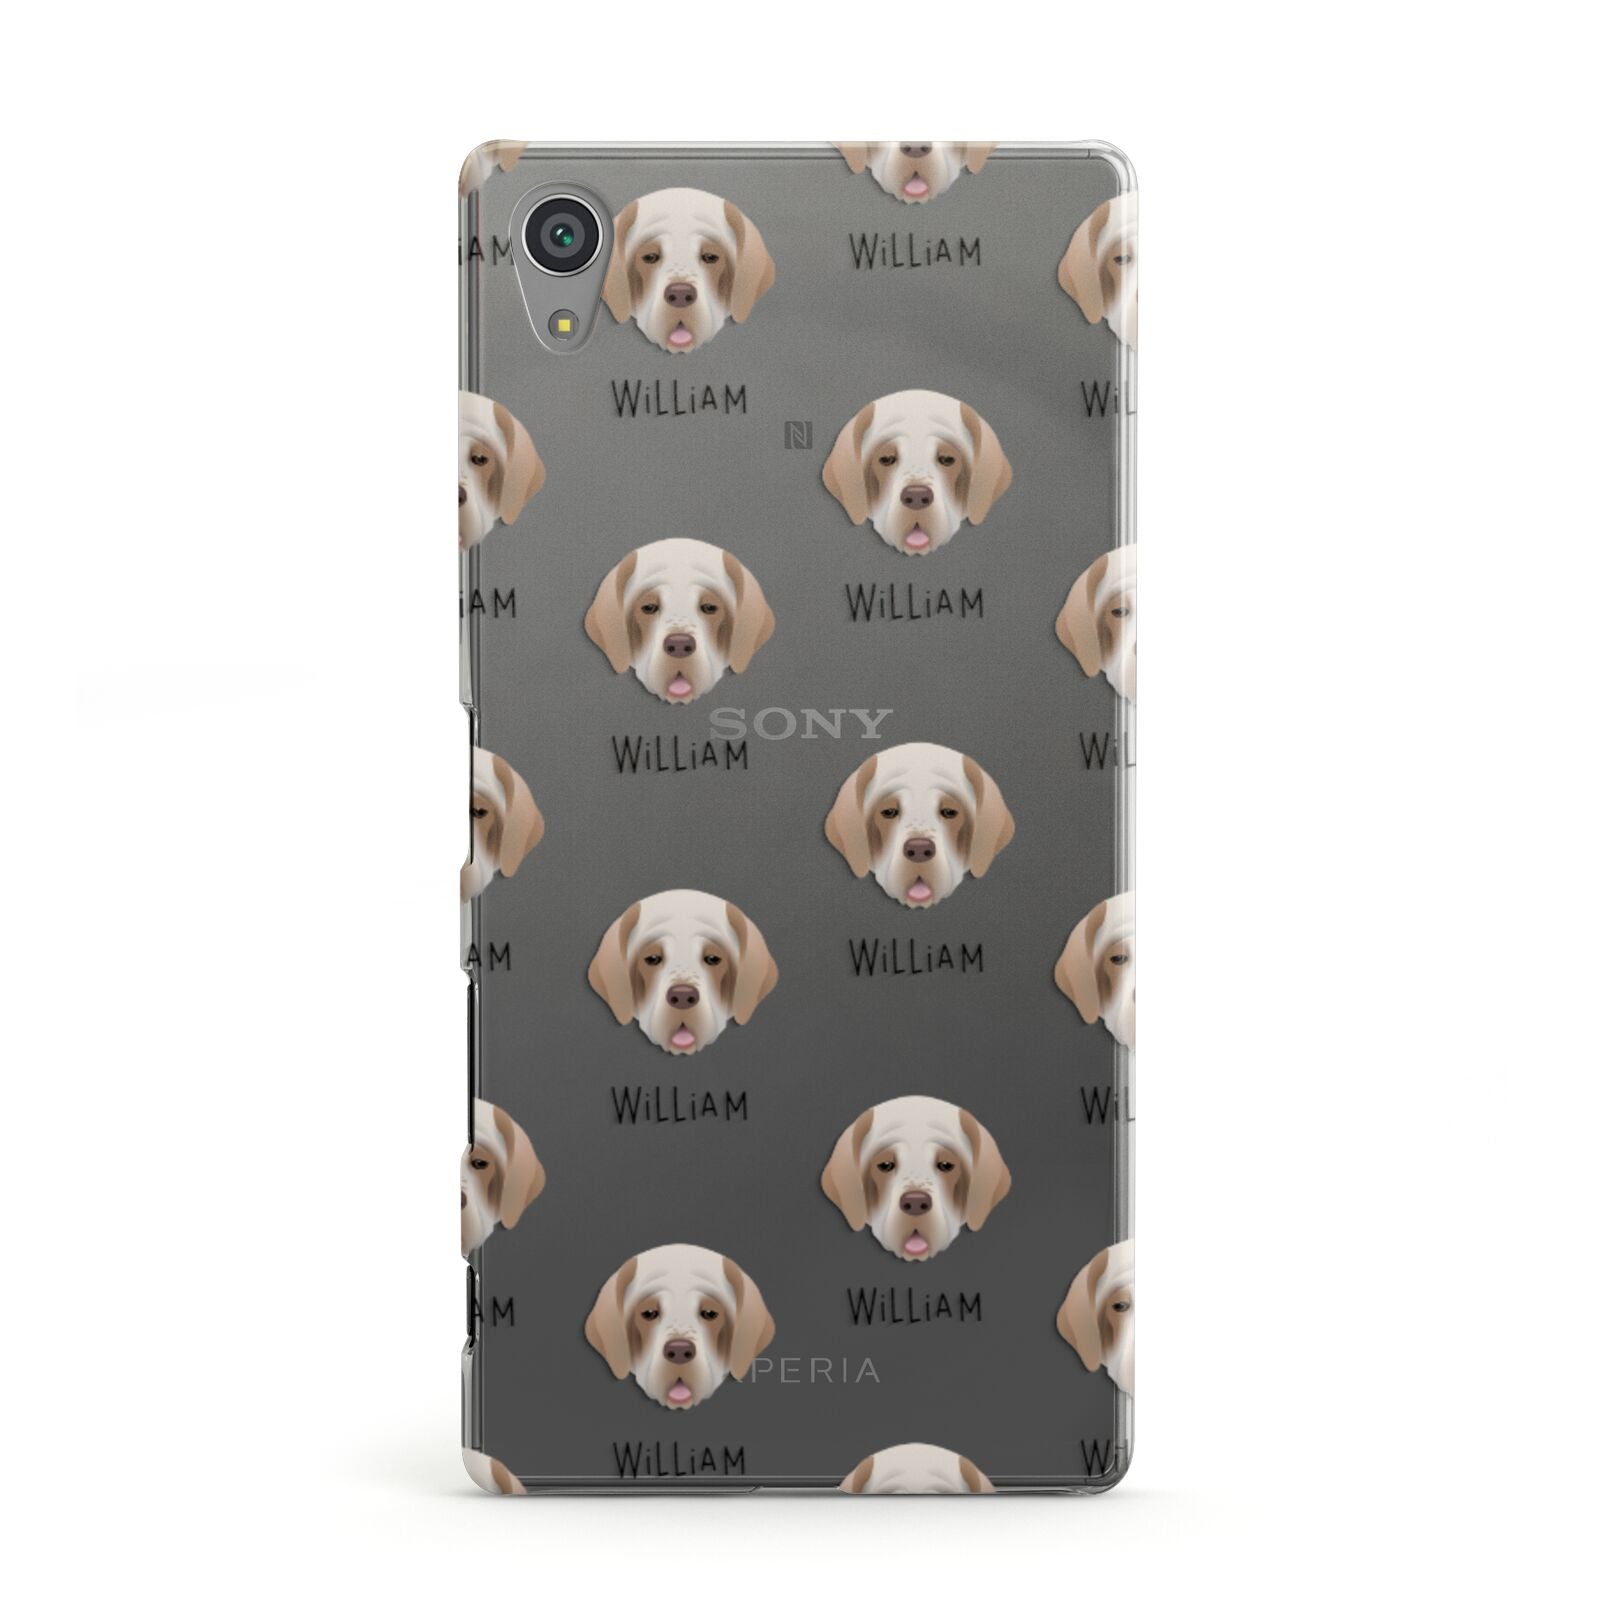 Clumber Spaniel Icon with Name Sony Xperia Case